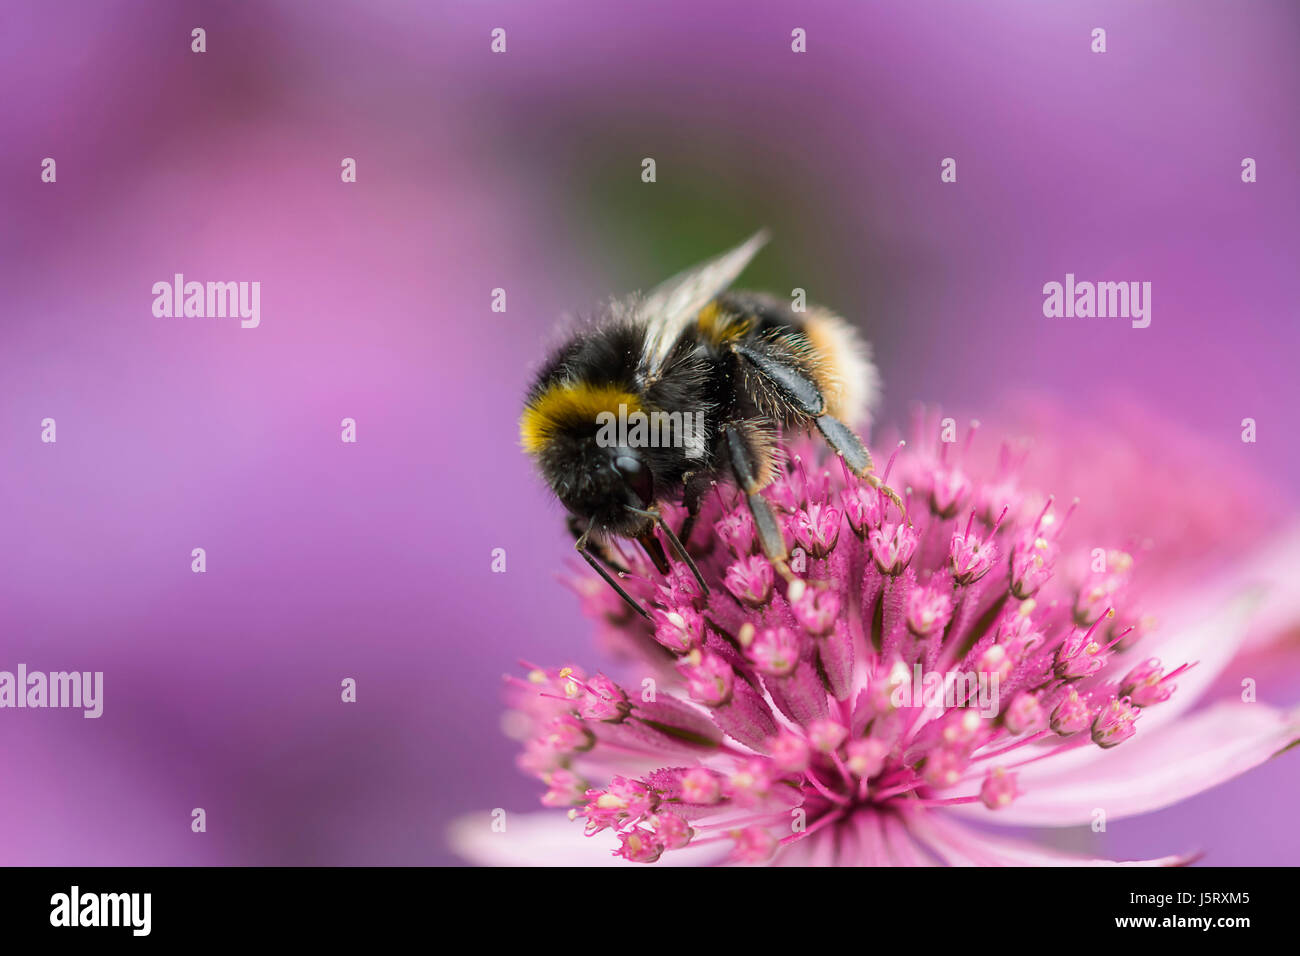 Astrantia, Masterwort, White-tailed Bumble bee, Bombus lucorum, pollinating an pink flower in a garden. Stock Photo